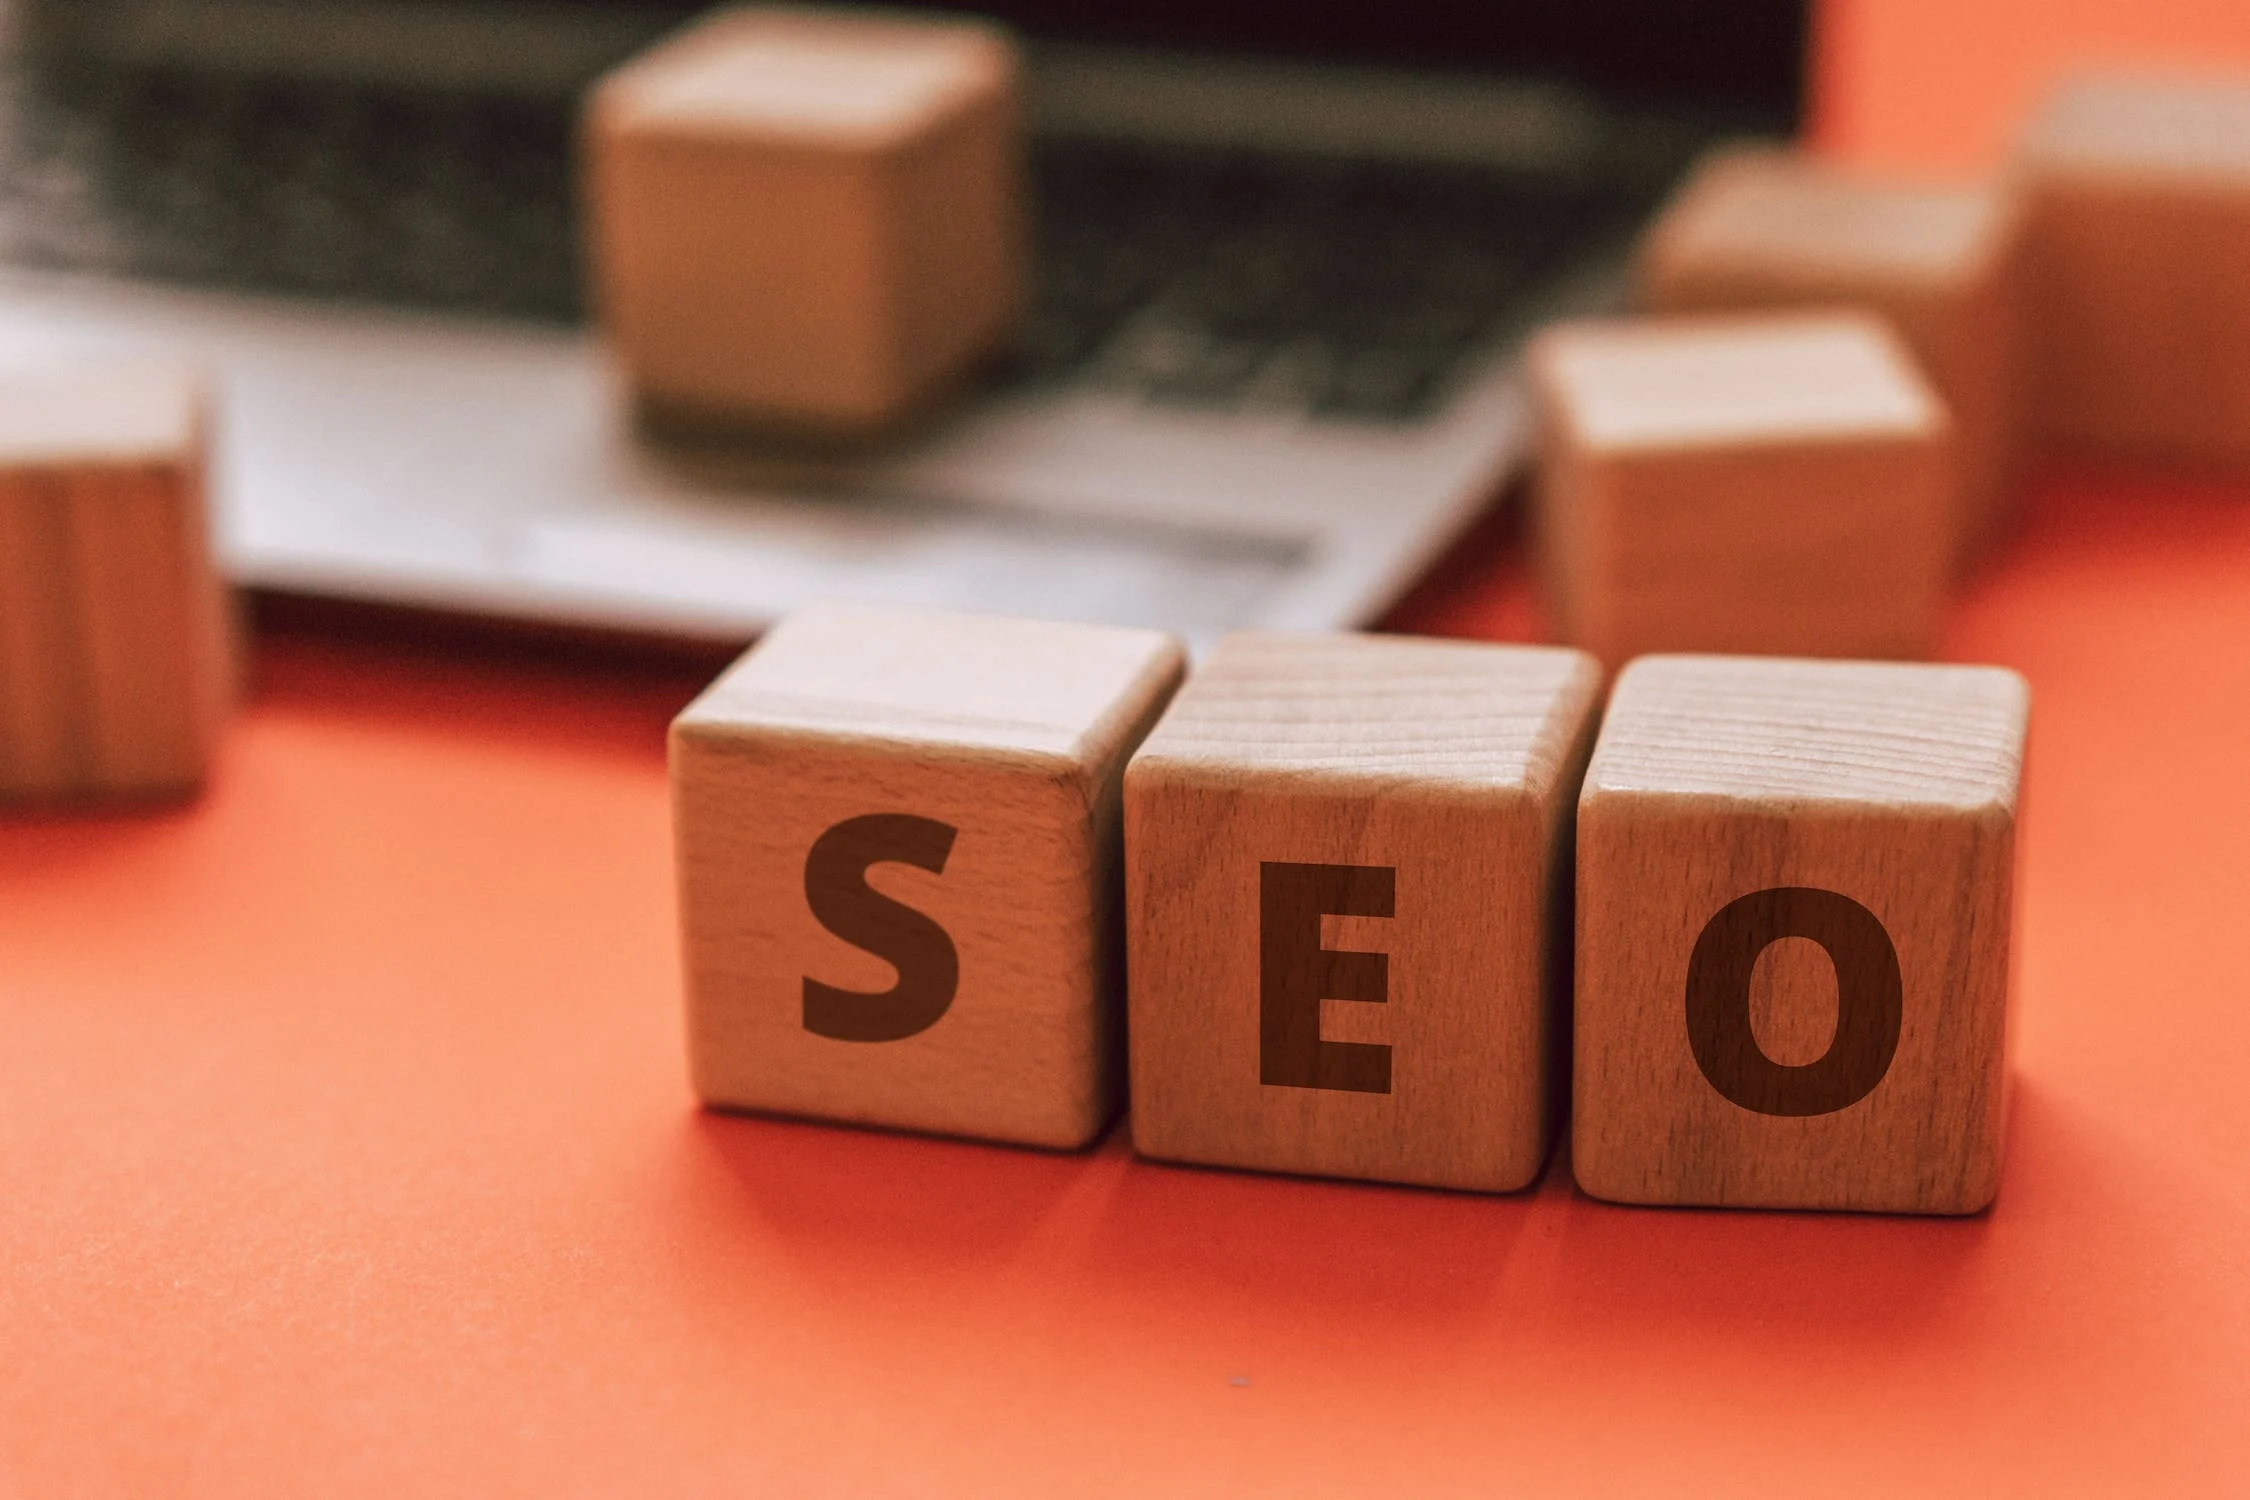 How much could you really lose by stopping SEO?